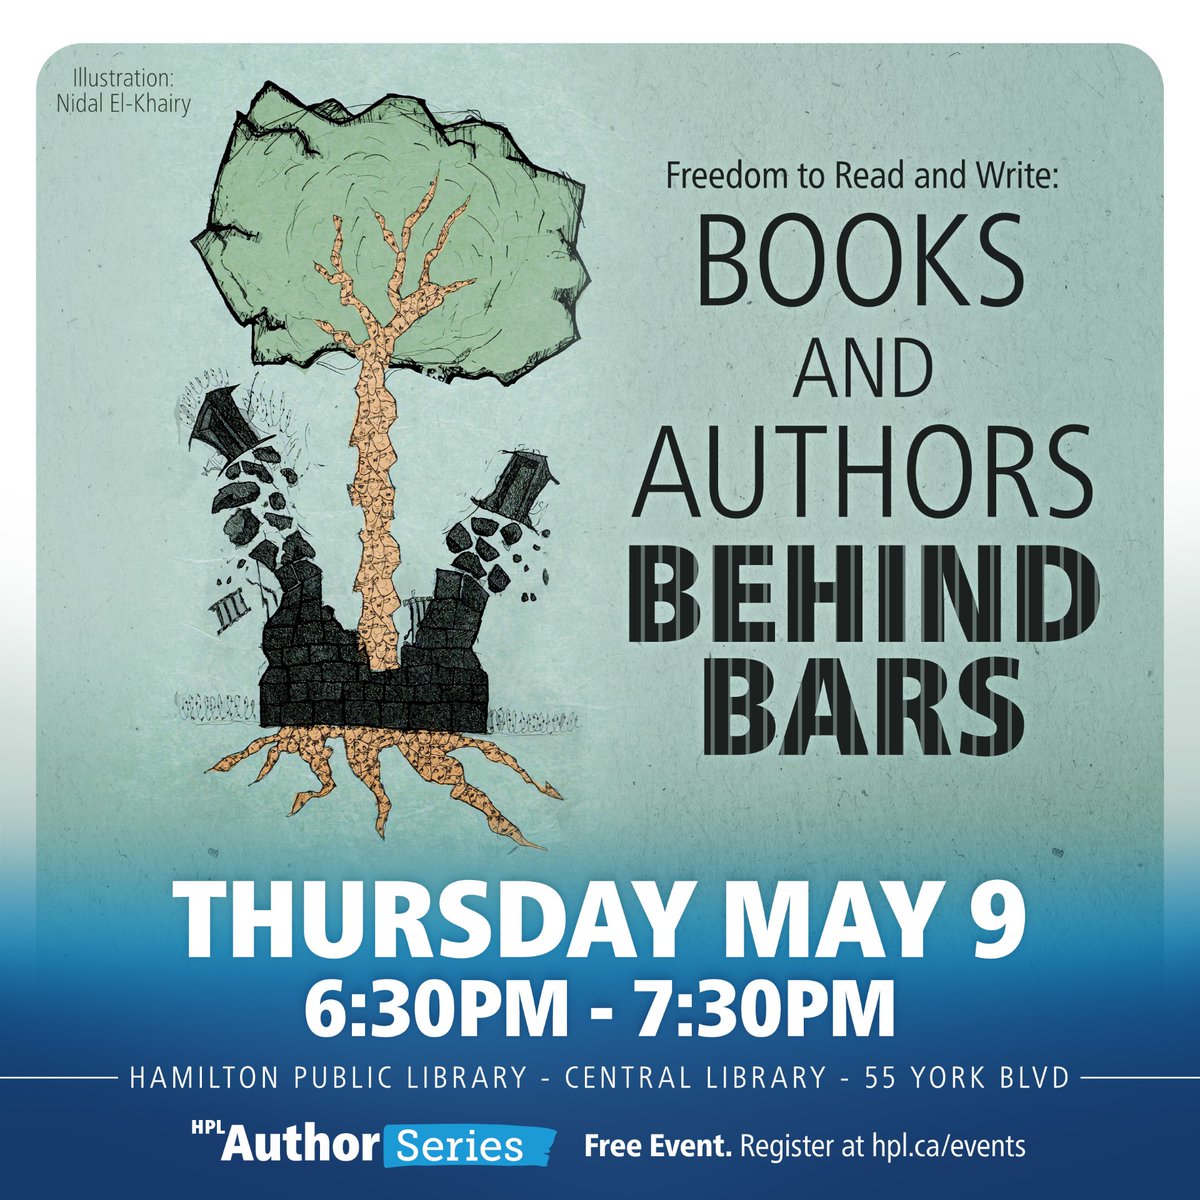 Prisoner publications creator @sarafalconer, former prison librarian Michelle De Agostini and prisoner support worker Pam, discuss prisoners' struggles to access and #write #books behind bars. Register to attend on May 9: events.hpl.ca/event/10426213 #HamOnt @hamilton_bridge